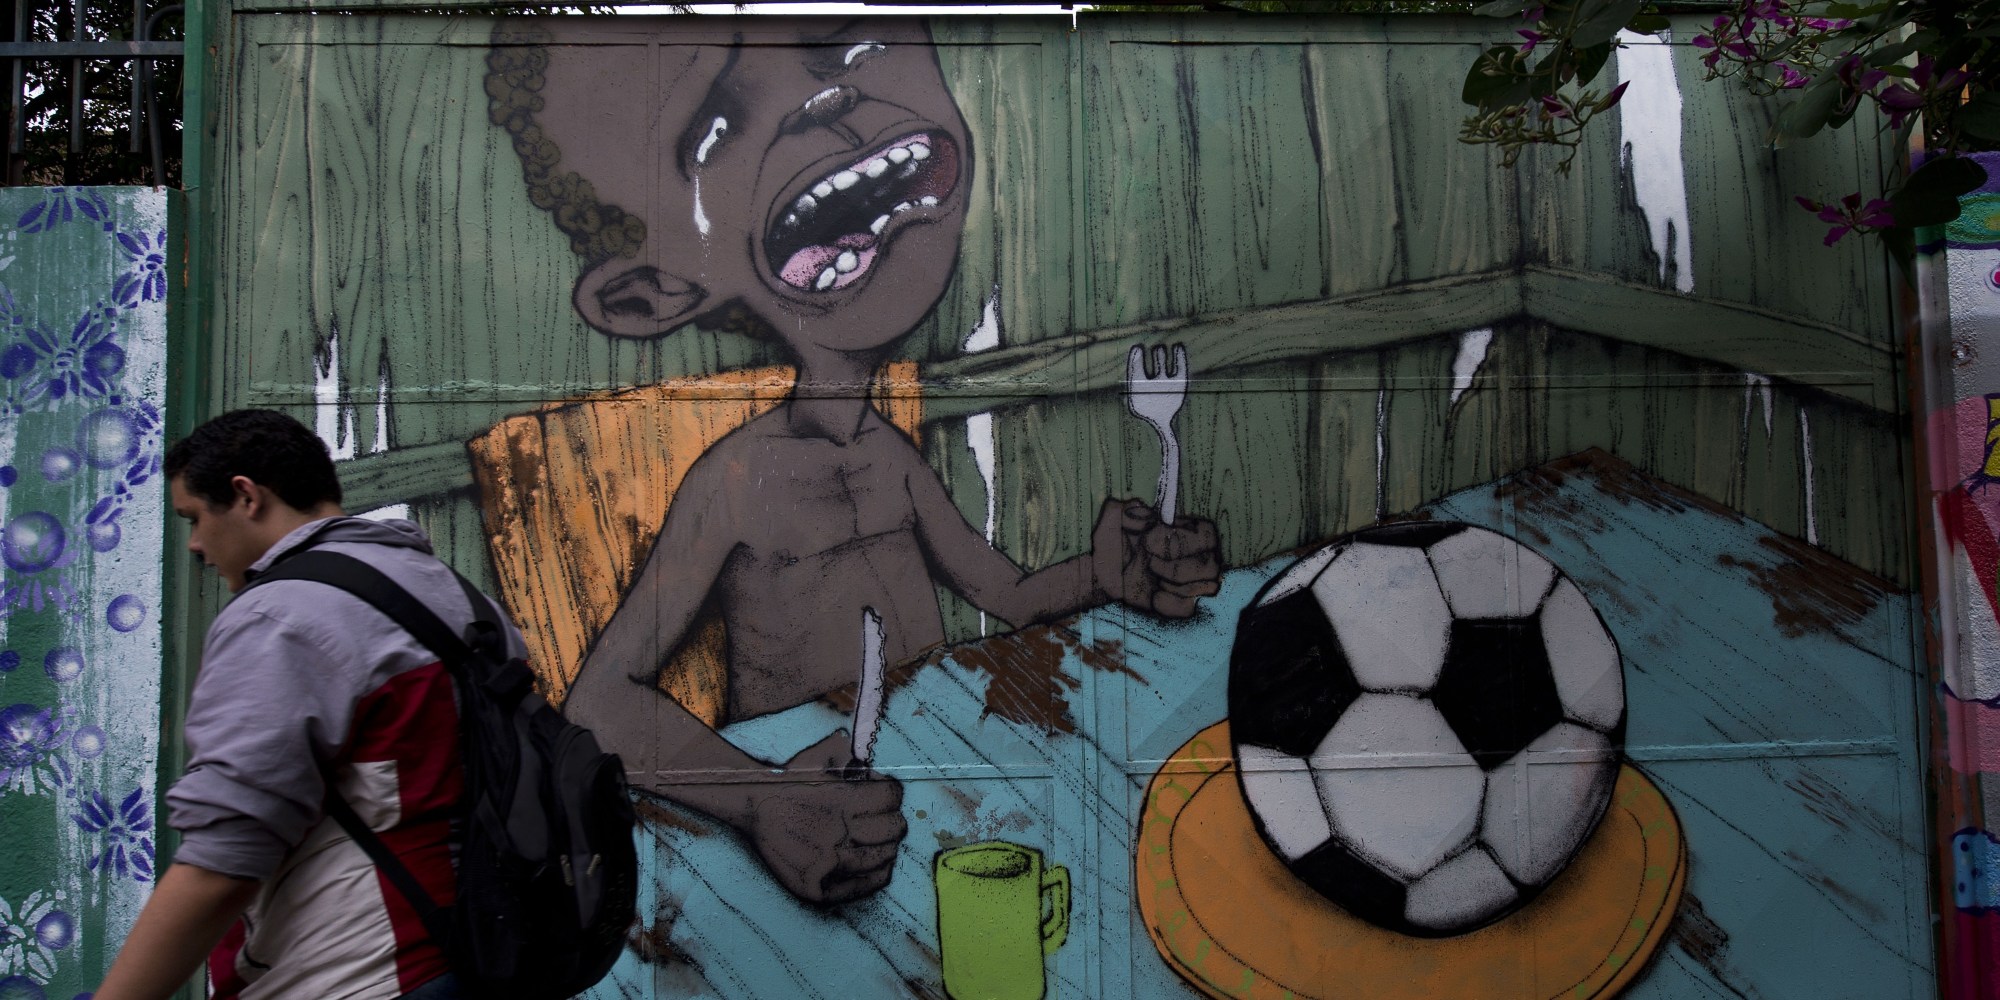 World Cup 2014: 14 Powerful Pictures Of Anti-Fifa Graffiti In Brazil